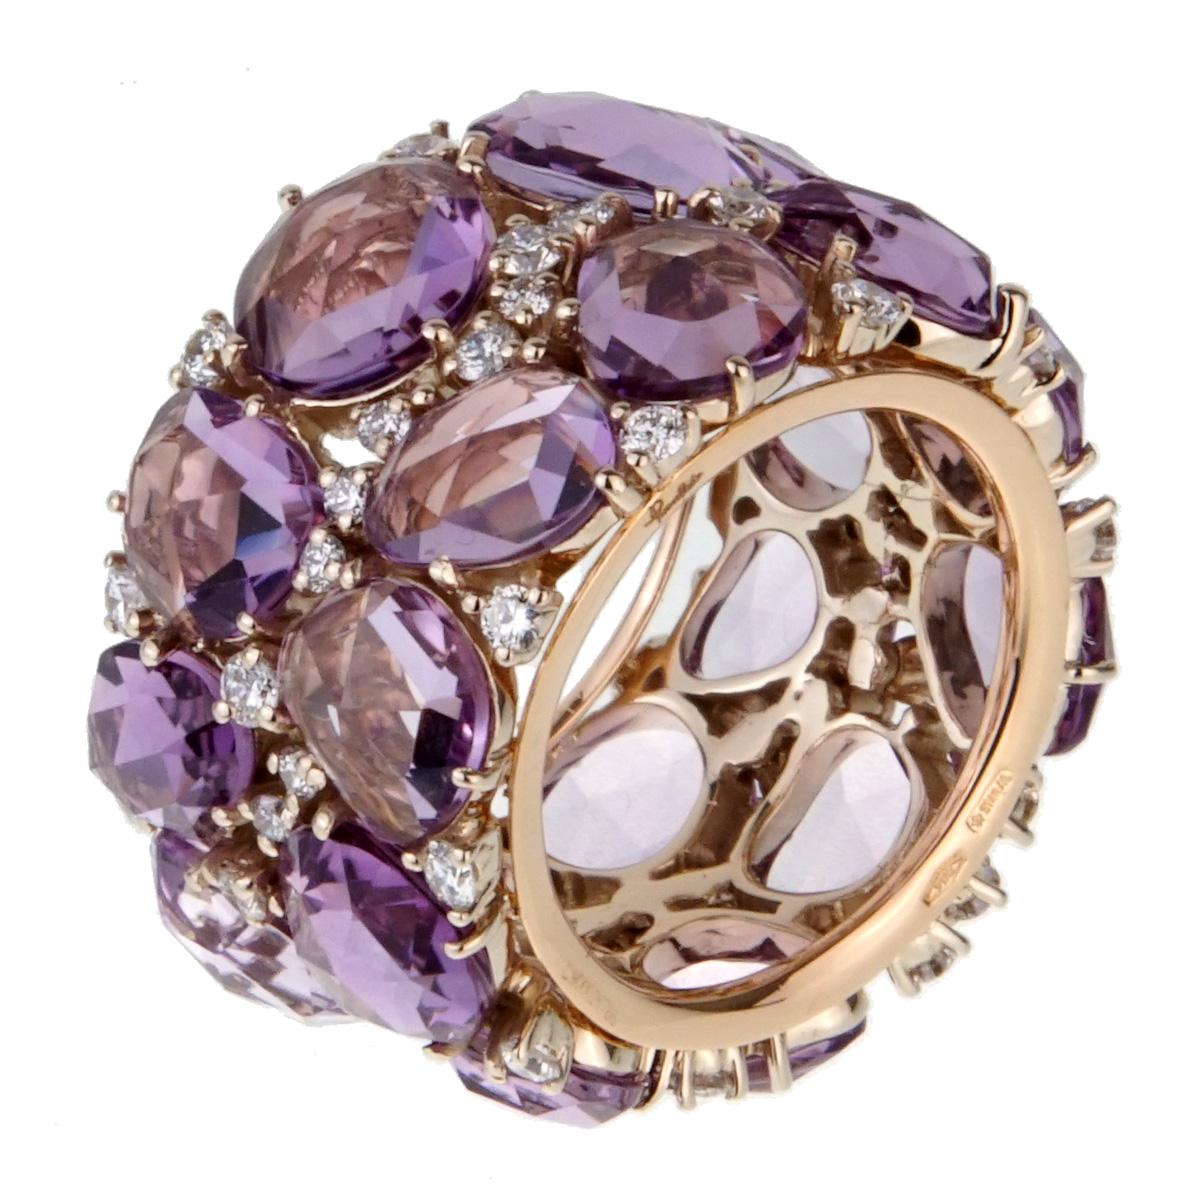 A magnificent Pomellato Lulu diamond ring featuring Amethyst and round brilliant cut diamonds in 18k rose gold. The ring measures a sz 7 and measures .59